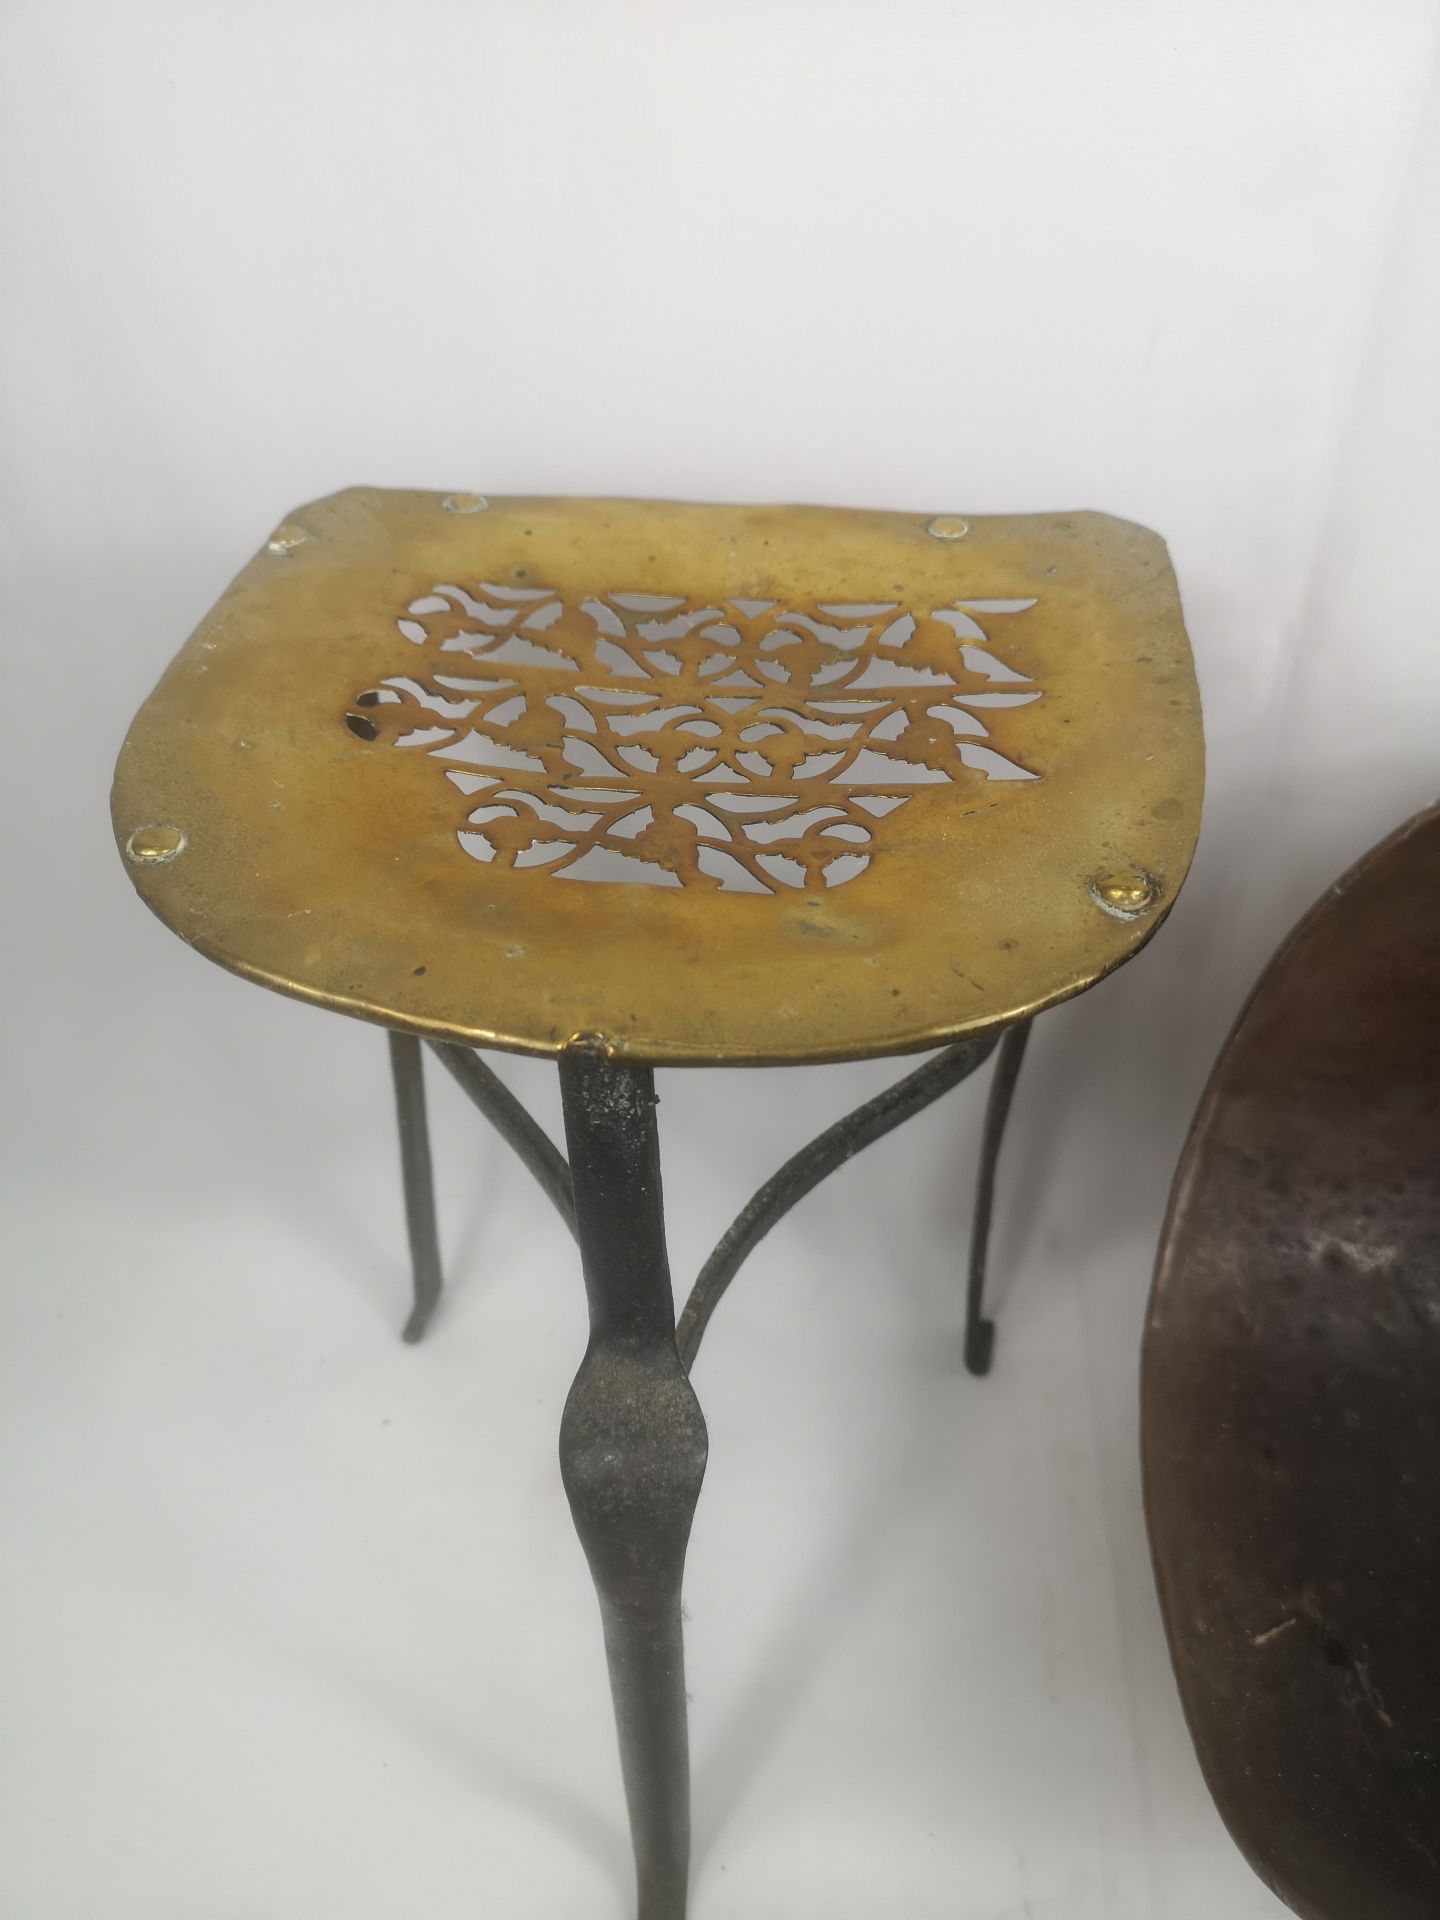 Copper coal scuttle and other items - Image 2 of 5